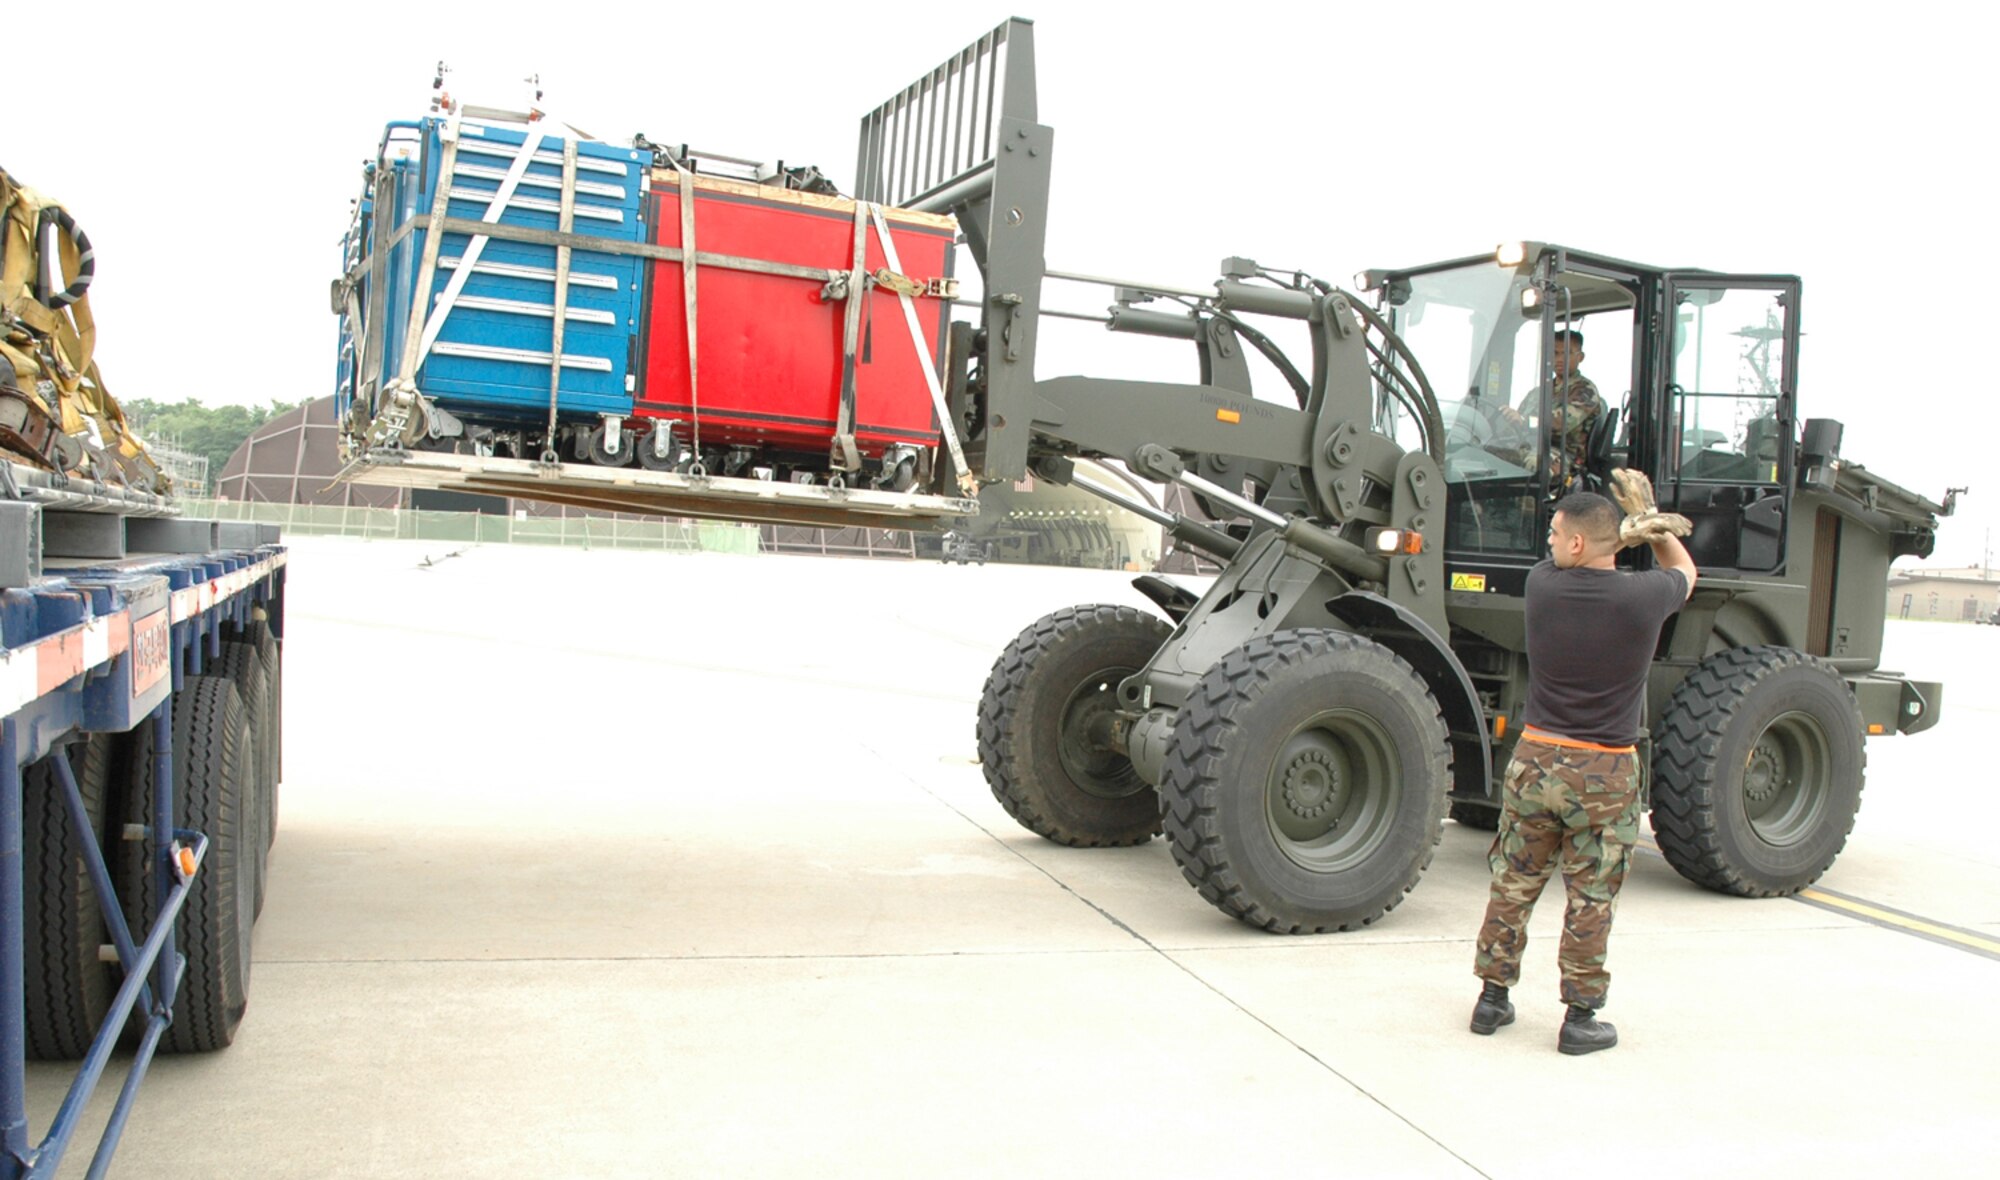 OSAN AIR BASE, Republic of Korea --  Senior Airman Rafael Bernal helps direct Airman 1st Class Rudy Garcia while unloading supplies for the 25th Fighter Squadron here Tuesday. Both Airmen are with the 51st Logistics Readiness Squadron. (U.S. Air Force photo by Staff Sgt. Benjamin Rojek)